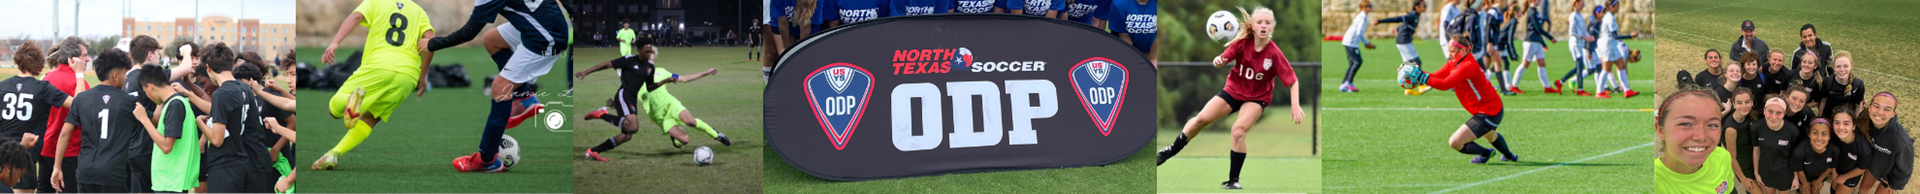 ODP_Banner_with_players_2